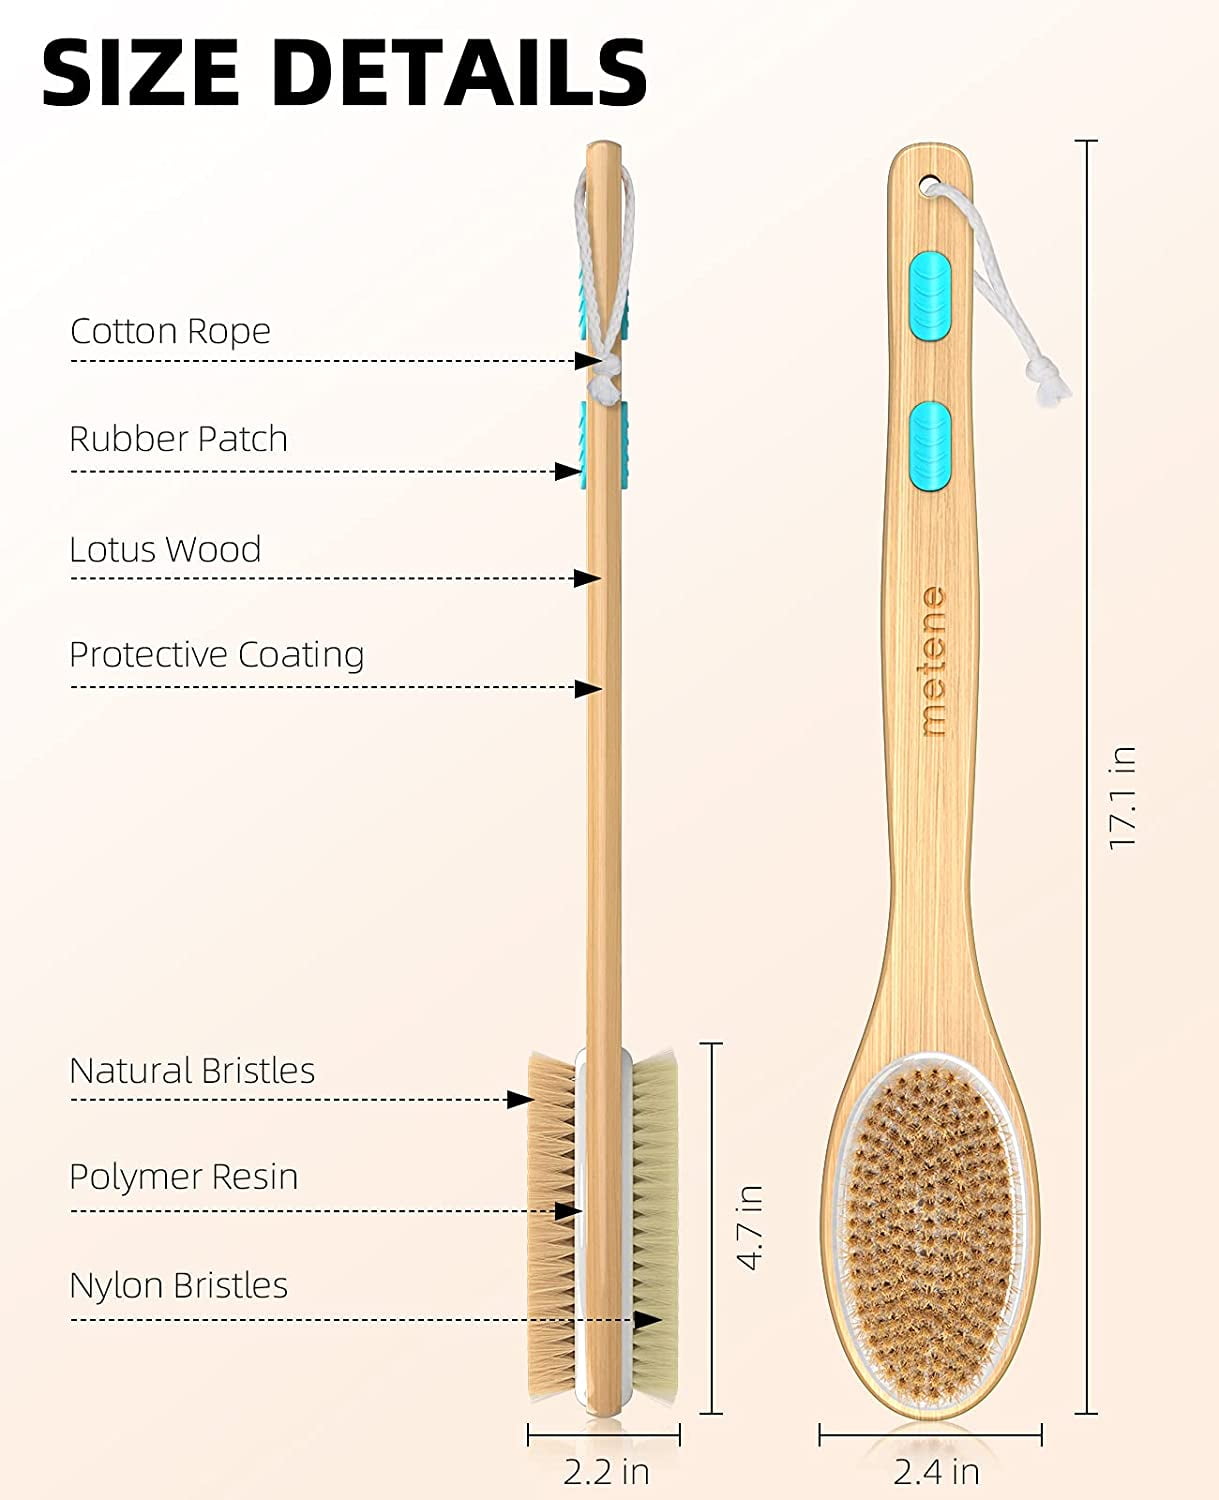 Shower Brush with Soft and Stiff Bristles, Bath Dual-Sided Long Handle，for  Wet or Dry Brushing